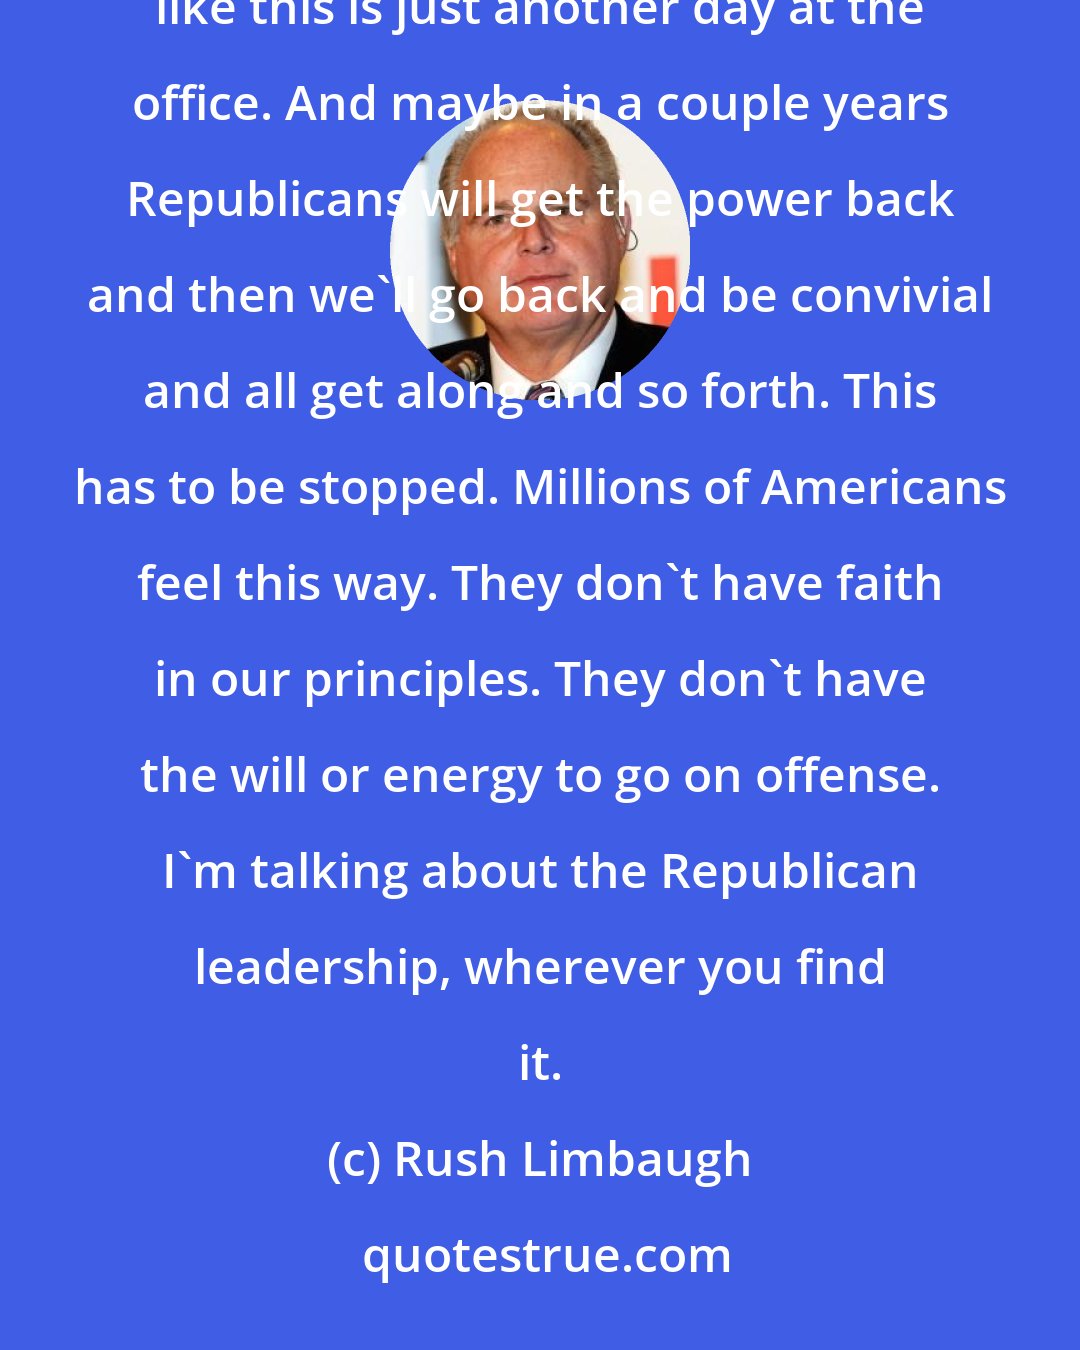 Rush Limbaugh: Nothing against Bob Dole but it's a different era now. They have no idea what we are facing. They act like this is just another day at the office. And maybe in a couple years Republicans will get the power back and then we'll go back and be convivial and all get along and so forth. This has to be stopped. Millions of Americans feel this way. They don't have faith in our principles. They don't have the will or energy to go on offense. I'm talking about the Republican leadership, wherever you find it.